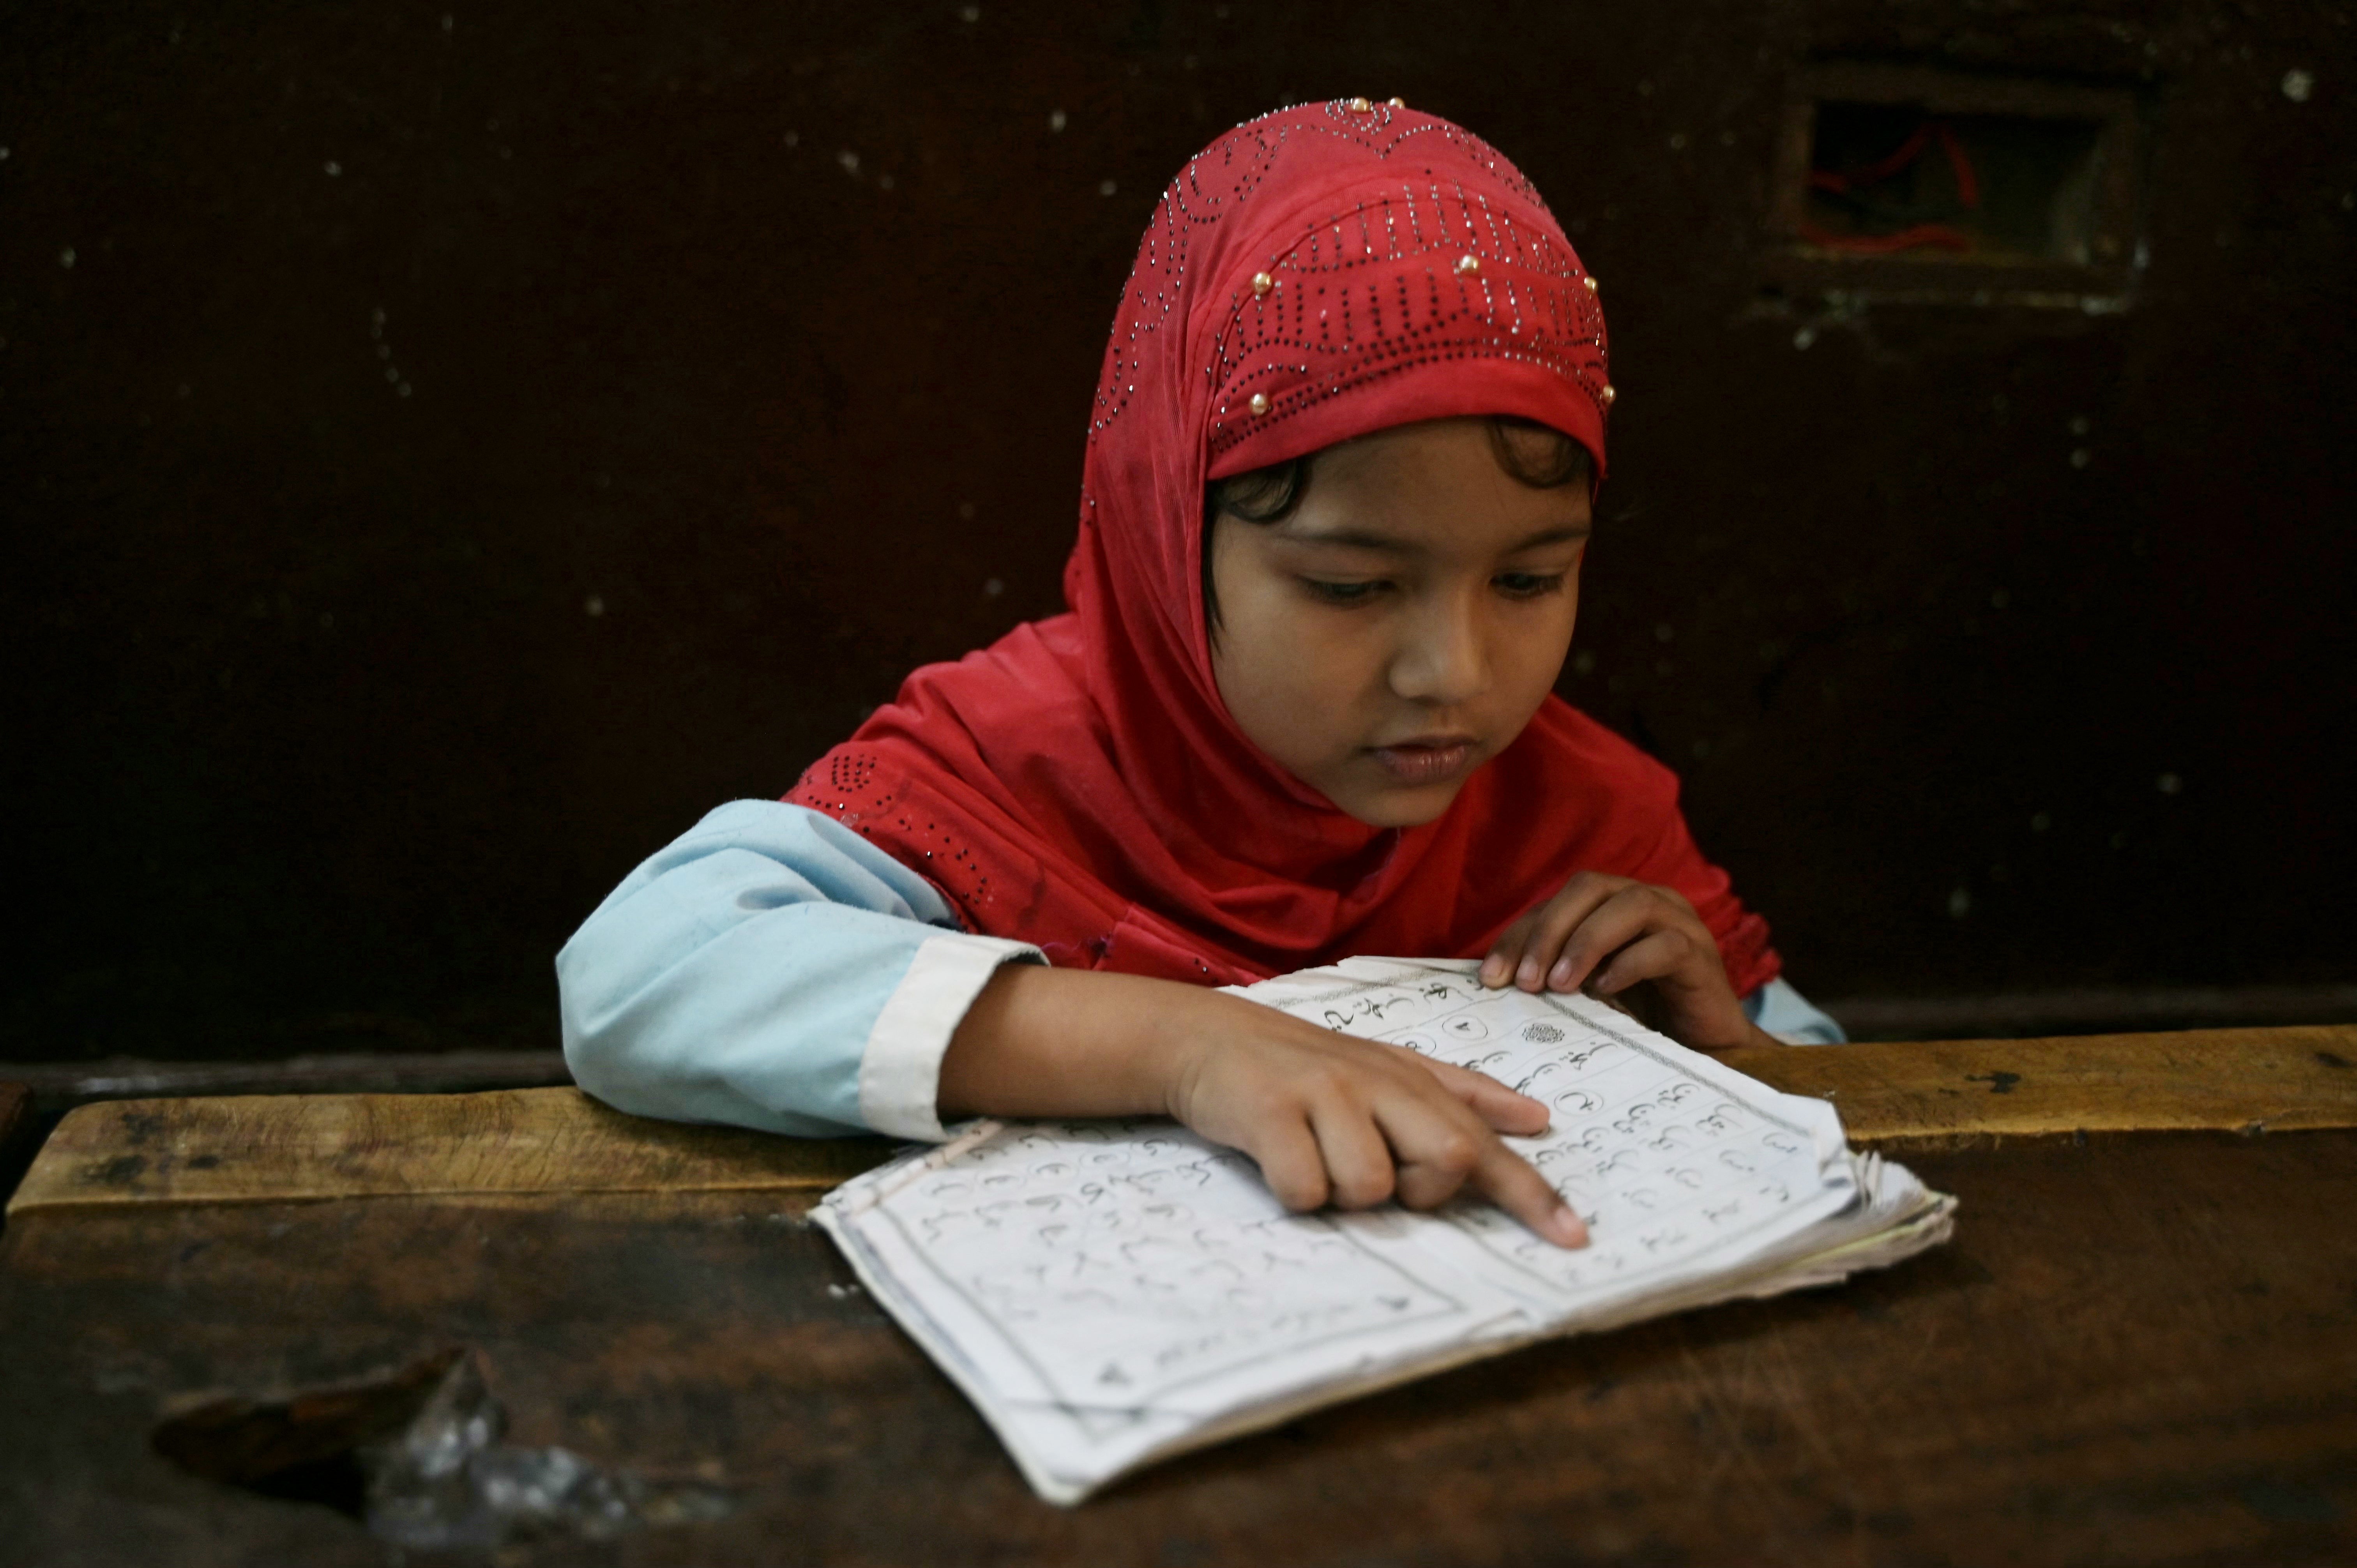 A student recites the Holy Quran in a classroom during the Islamic holy month of Ramadan at the Madrasatur-Rashaad religious school in Hyderabad